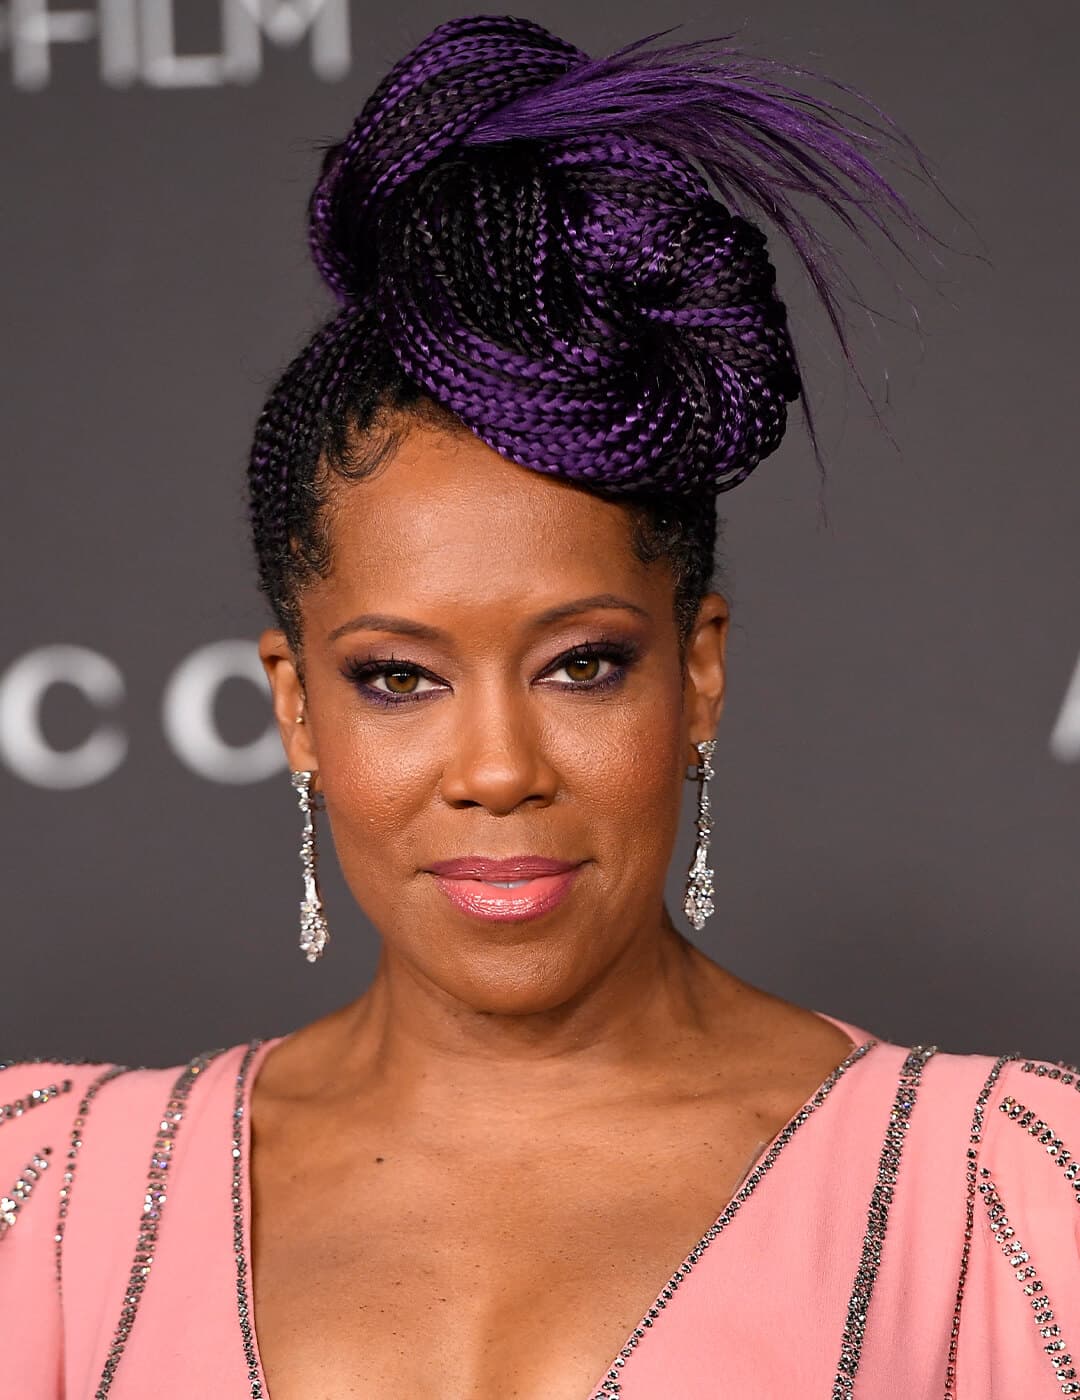 Regina King rocking a purple braided updo hairstyle, smoky eyeshadow makeup, silver dangling earrings, and pink and silver sequins dress